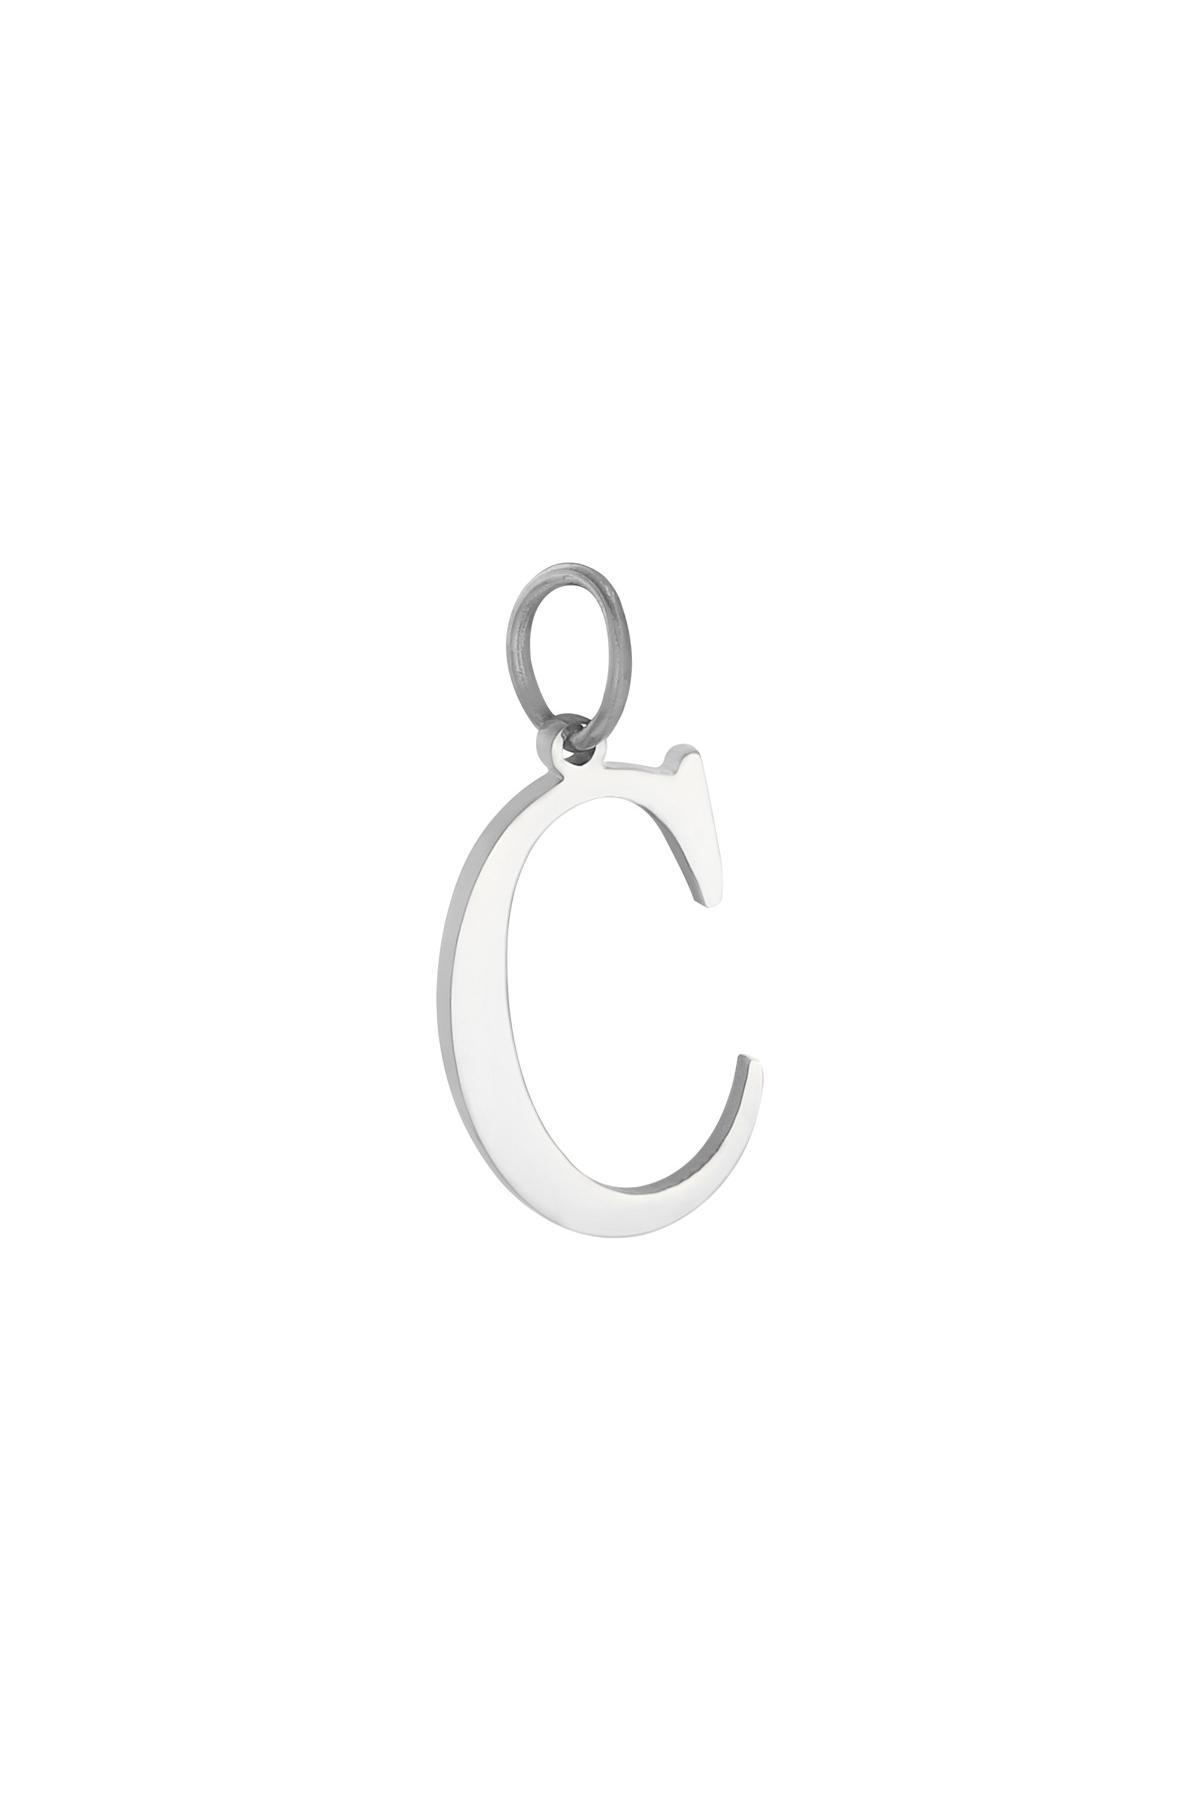 Charm C Zilver Stainless Steel h5 